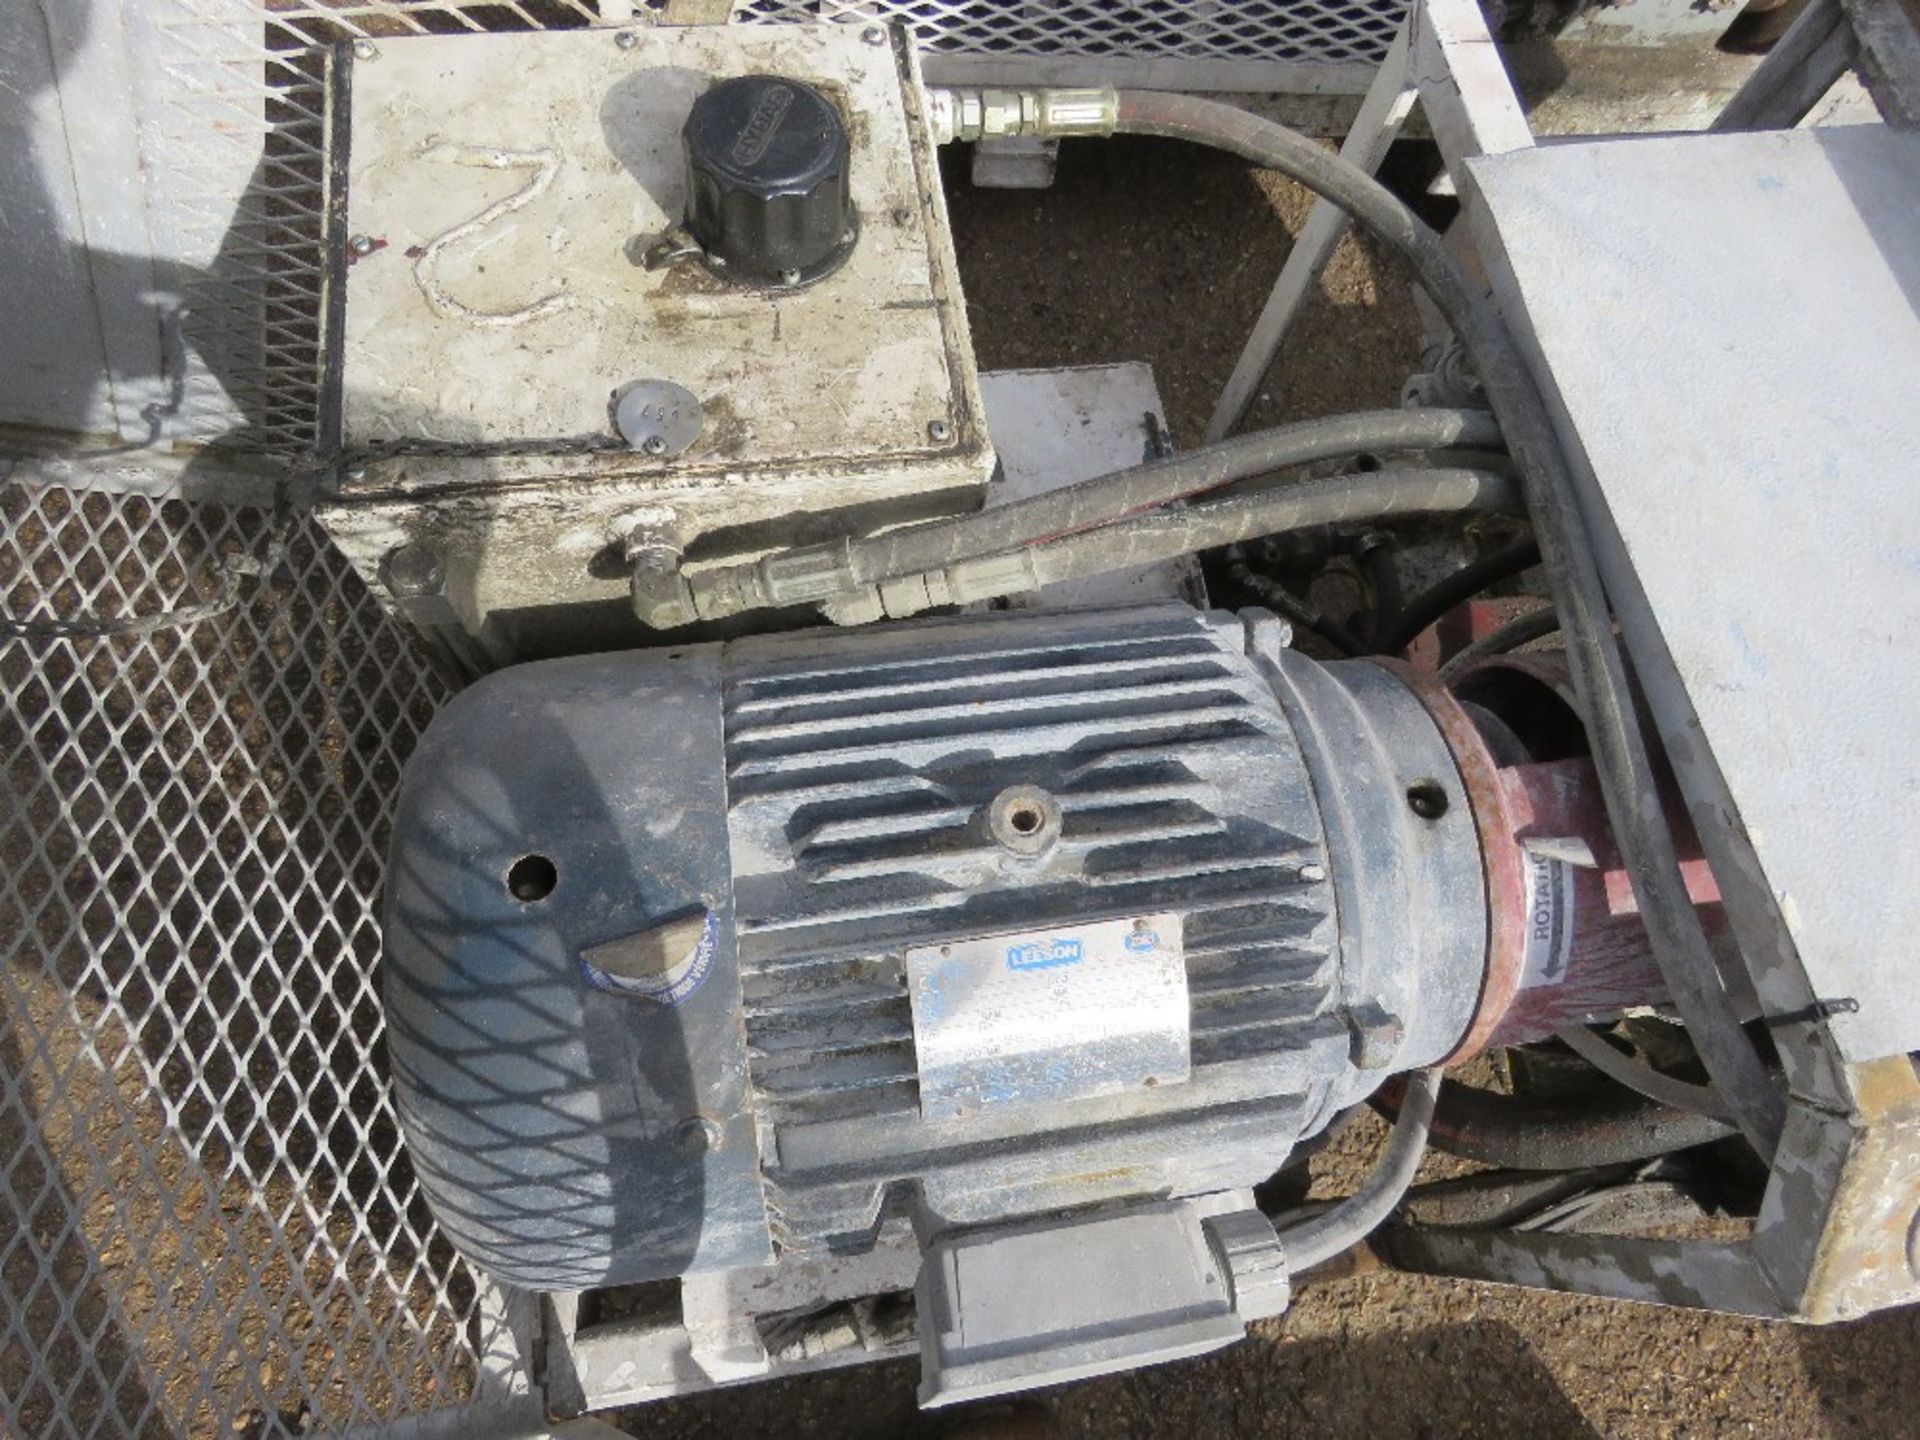 SUN CONSTRUCTION INC 320E TYPE SCREED / MORTAR / RENDER PUMP . TWIN PISTON UNIT THAT IS 3 PHASE POWE - Image 2 of 5